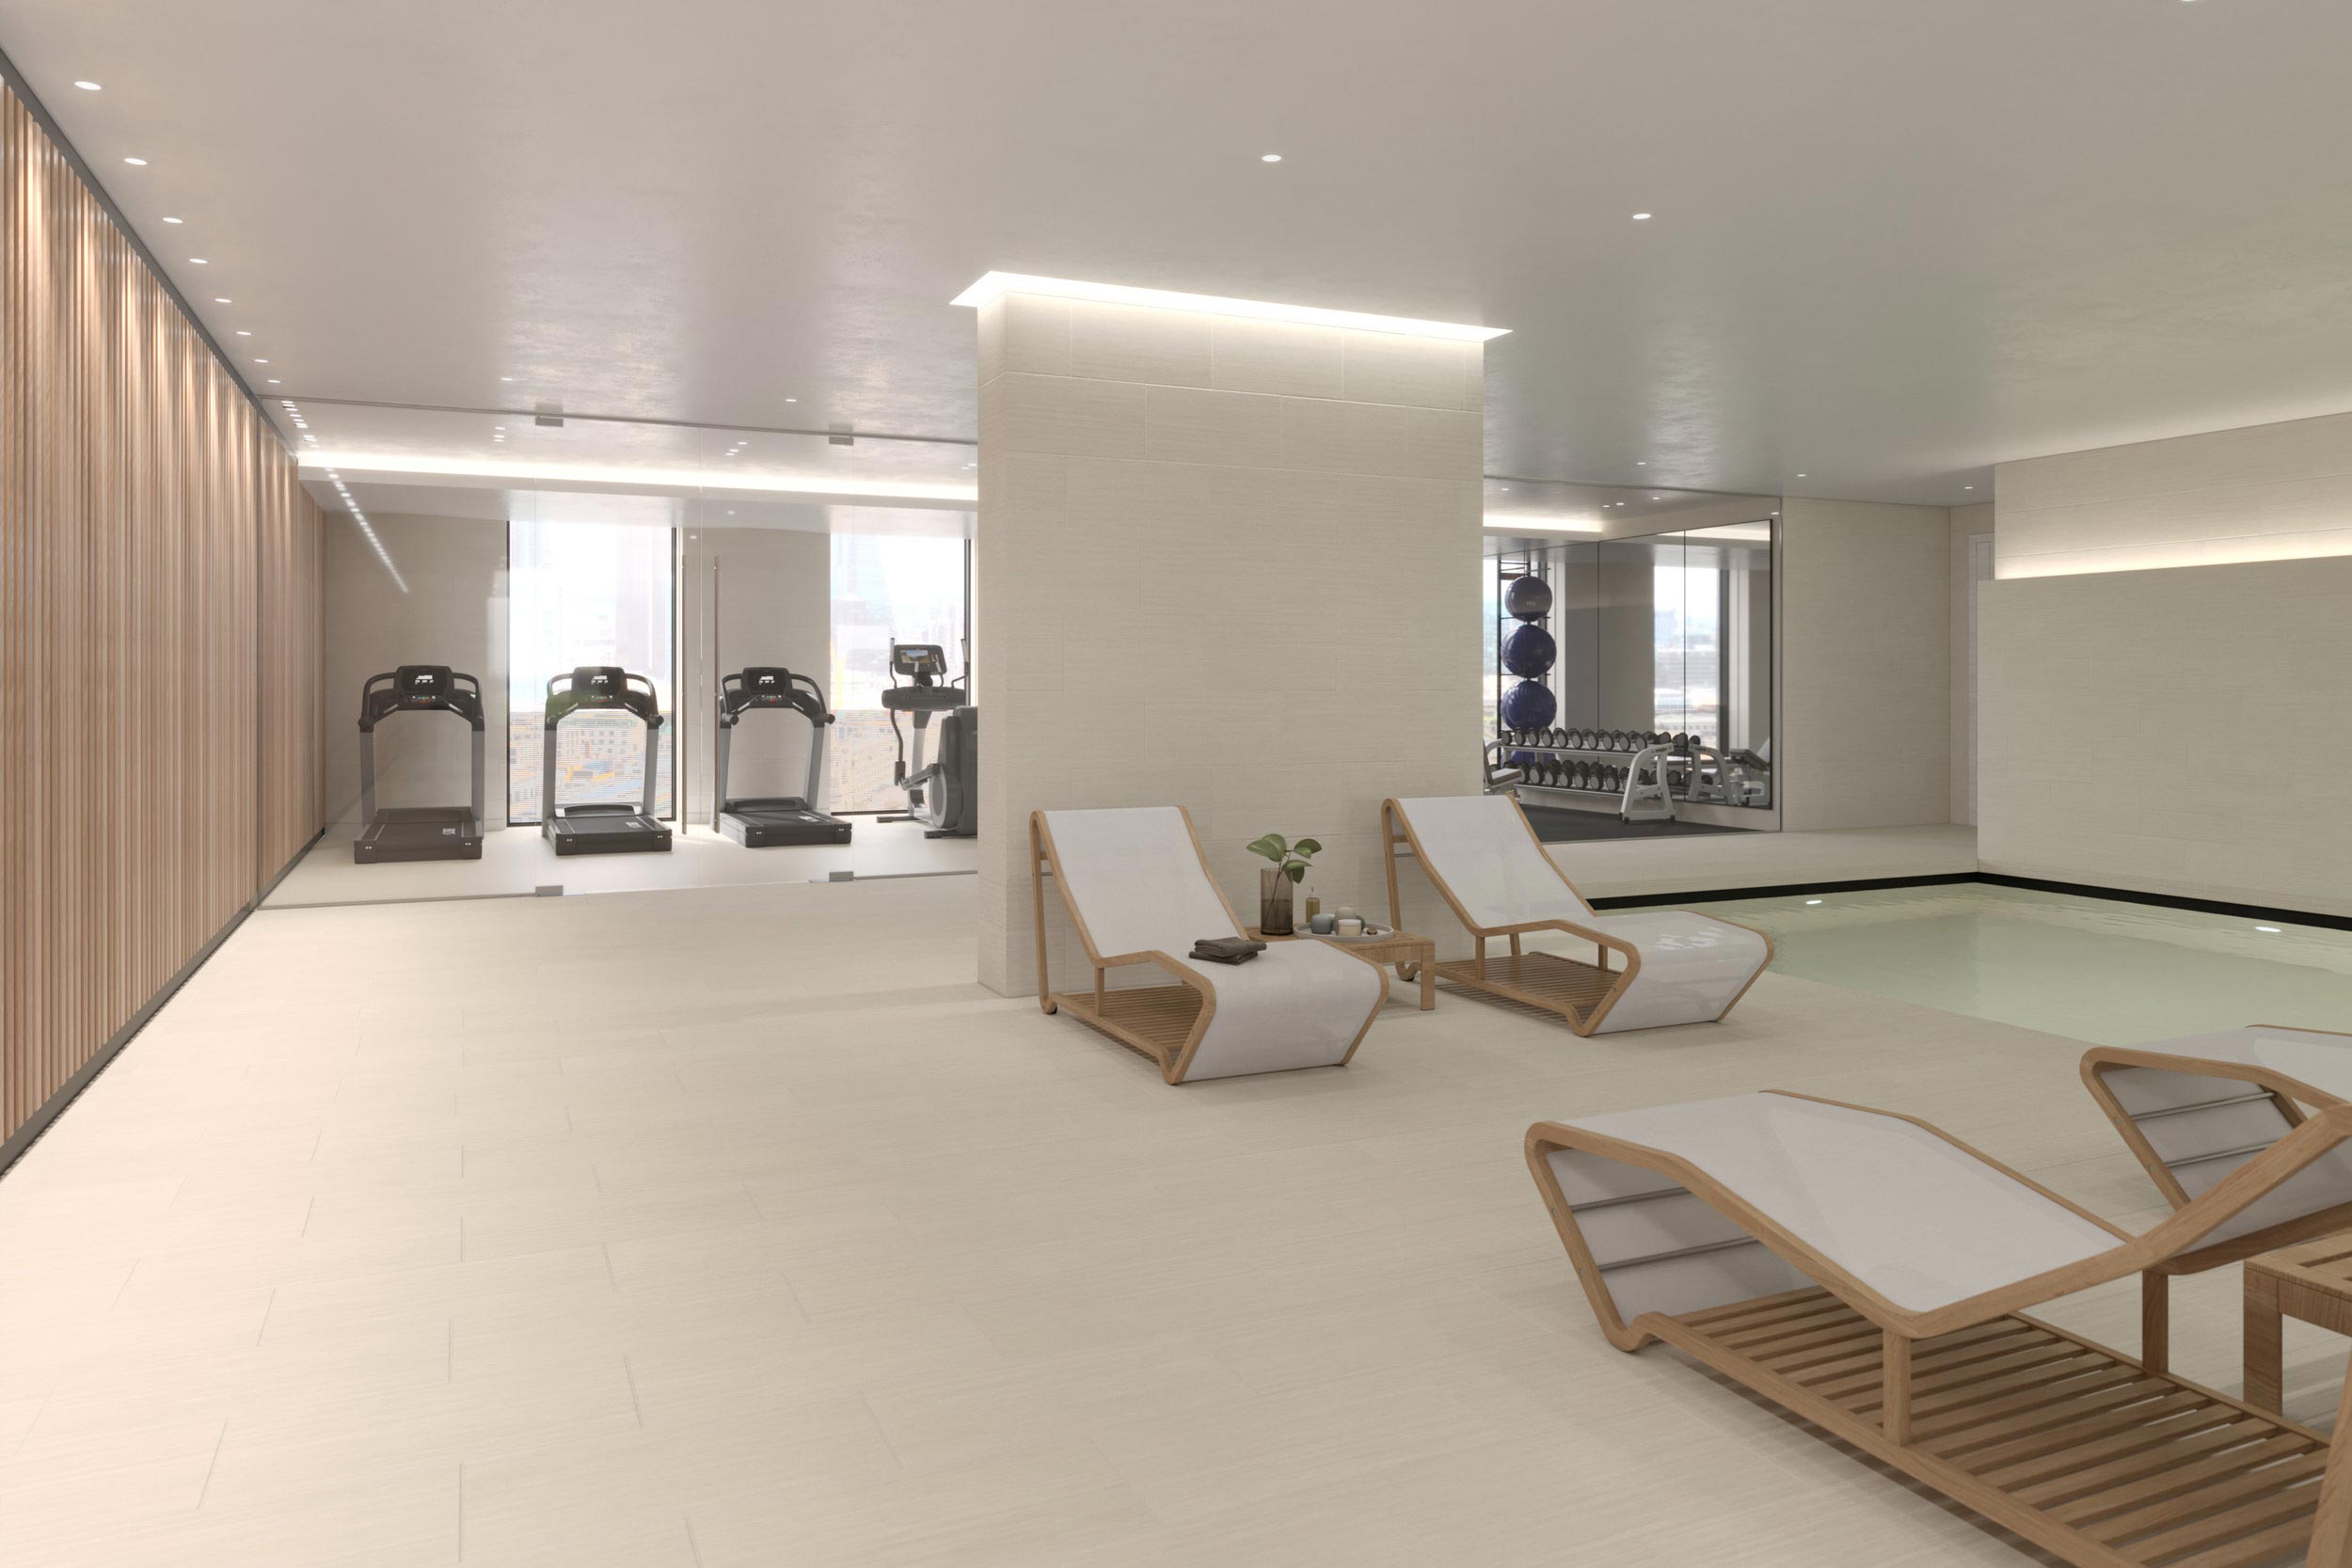 Commercial Spa Gym Fitness Centre Wellness Interior Design CGI Concept Visuals in London by Unit4